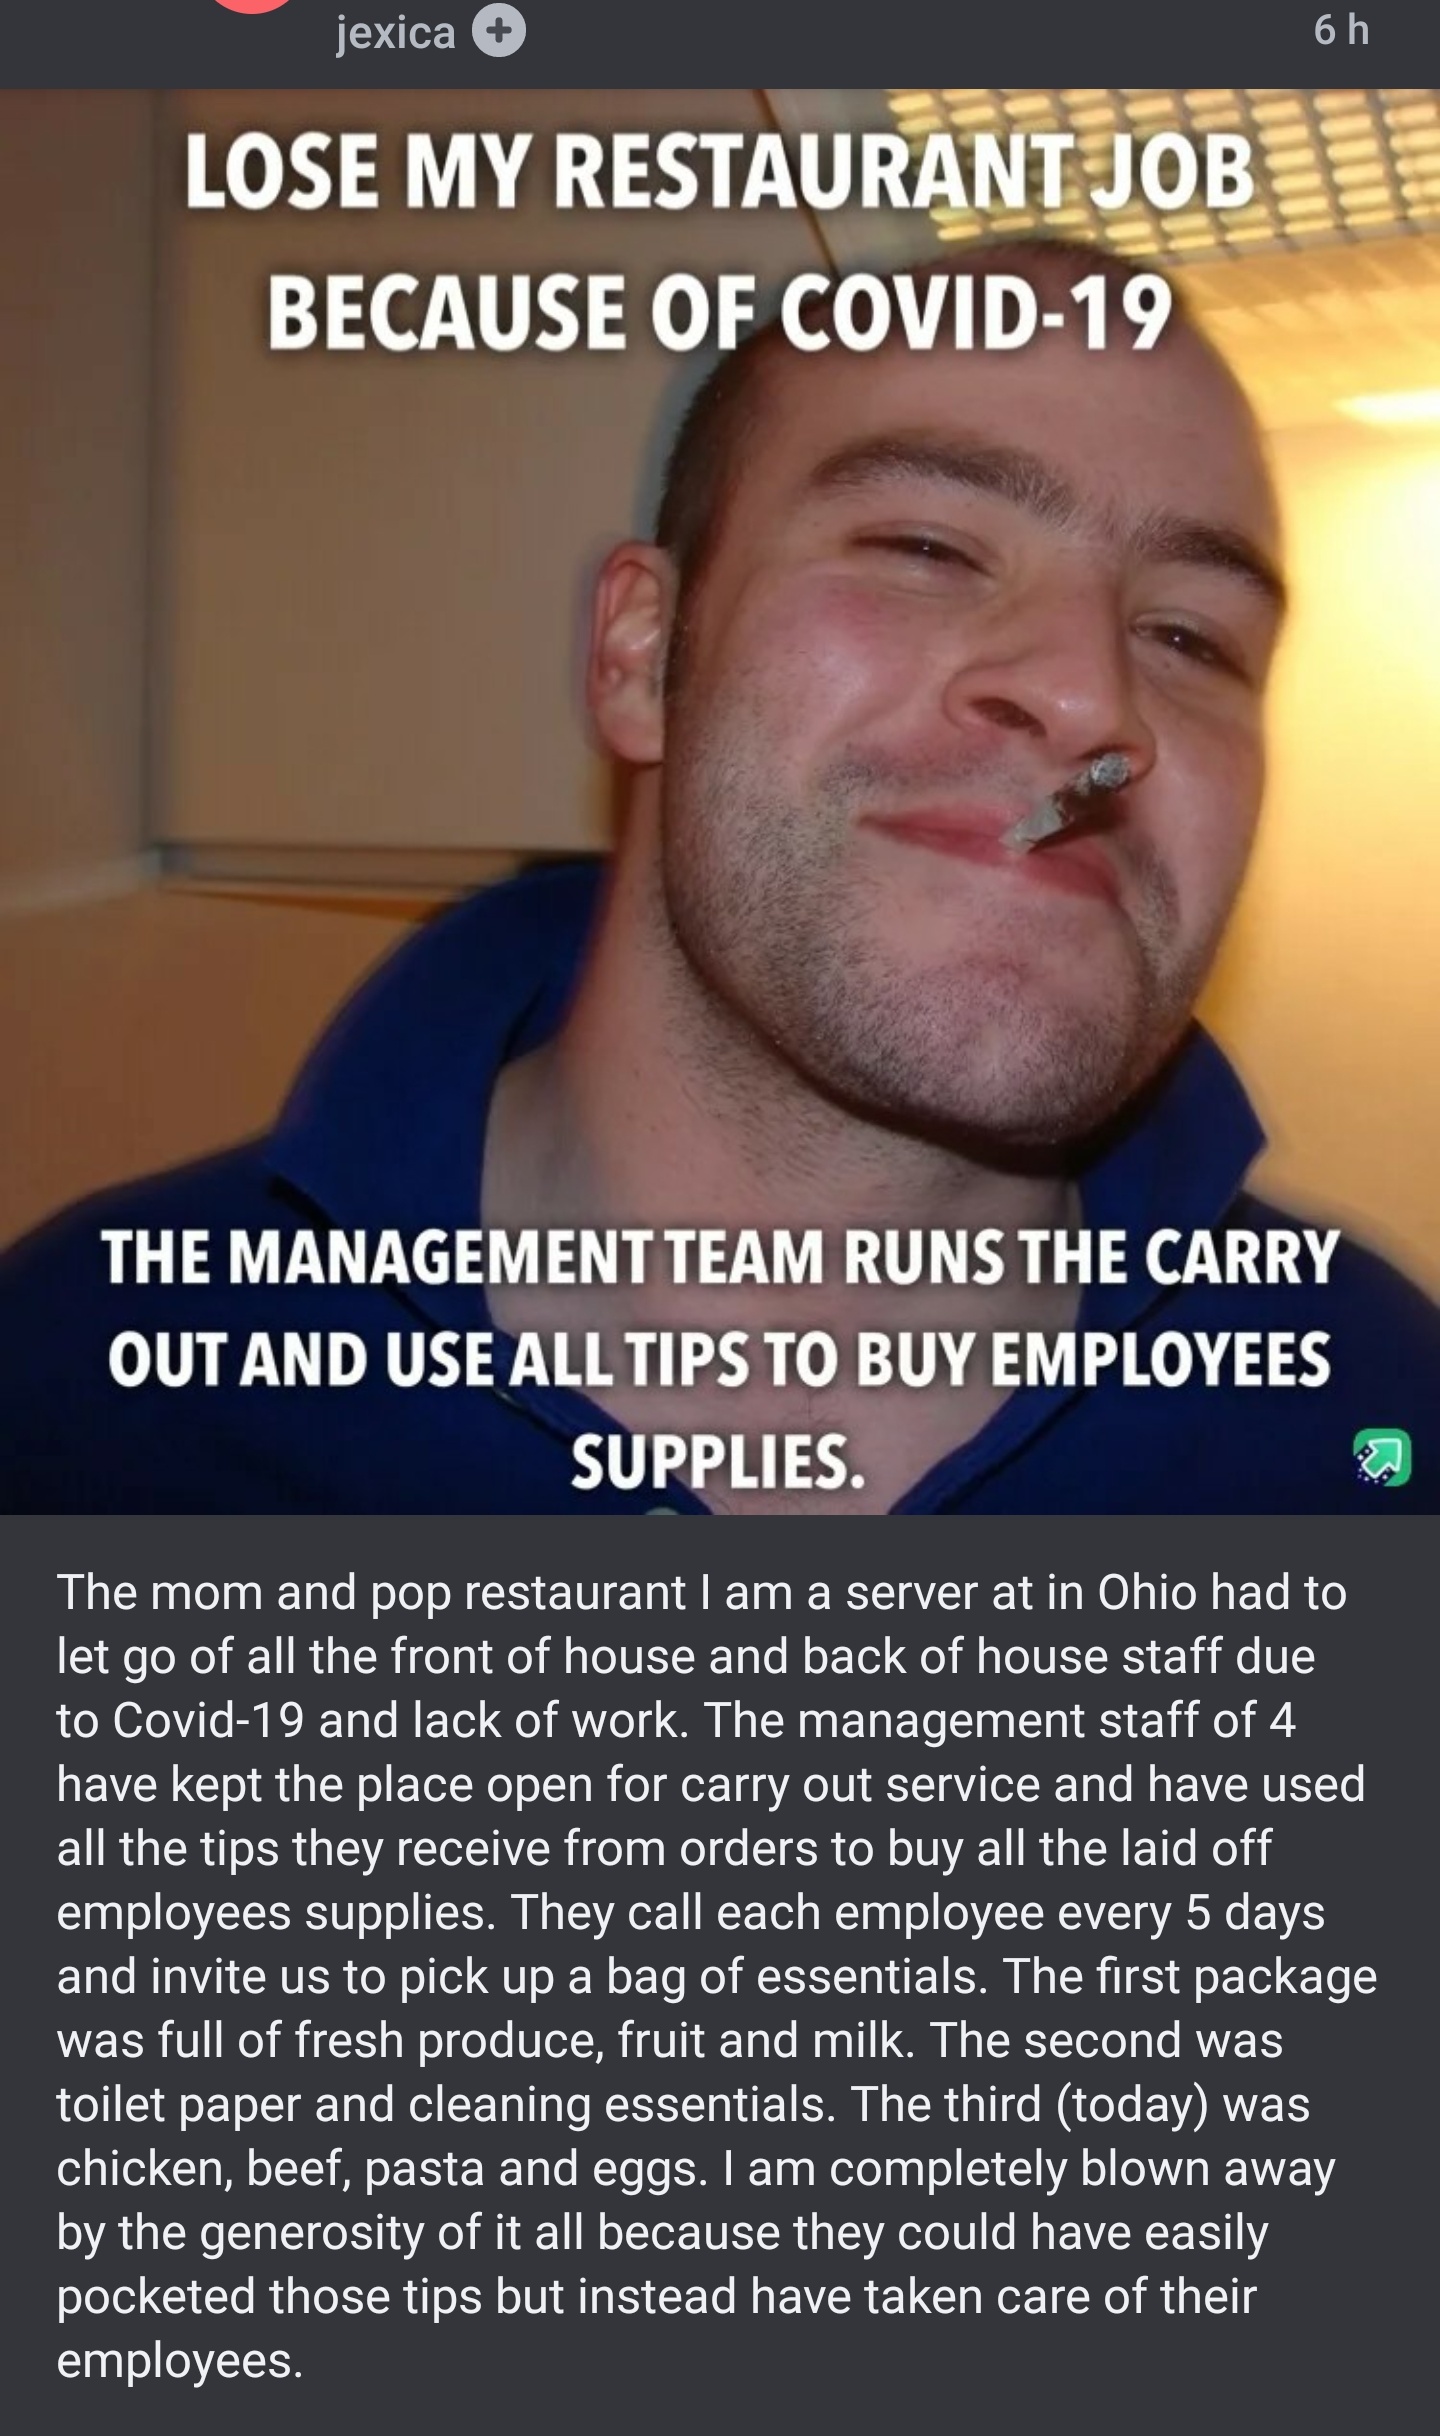 photo caption - 5h jexica Lose My Restaurantjob Because Of Covid19 The Management Team Runs The Carry Out And Use All Tips To Buy Employees Supplies. The mom and pop restaurant I am a server at in Ohio had to let go of all the front of house and back of h